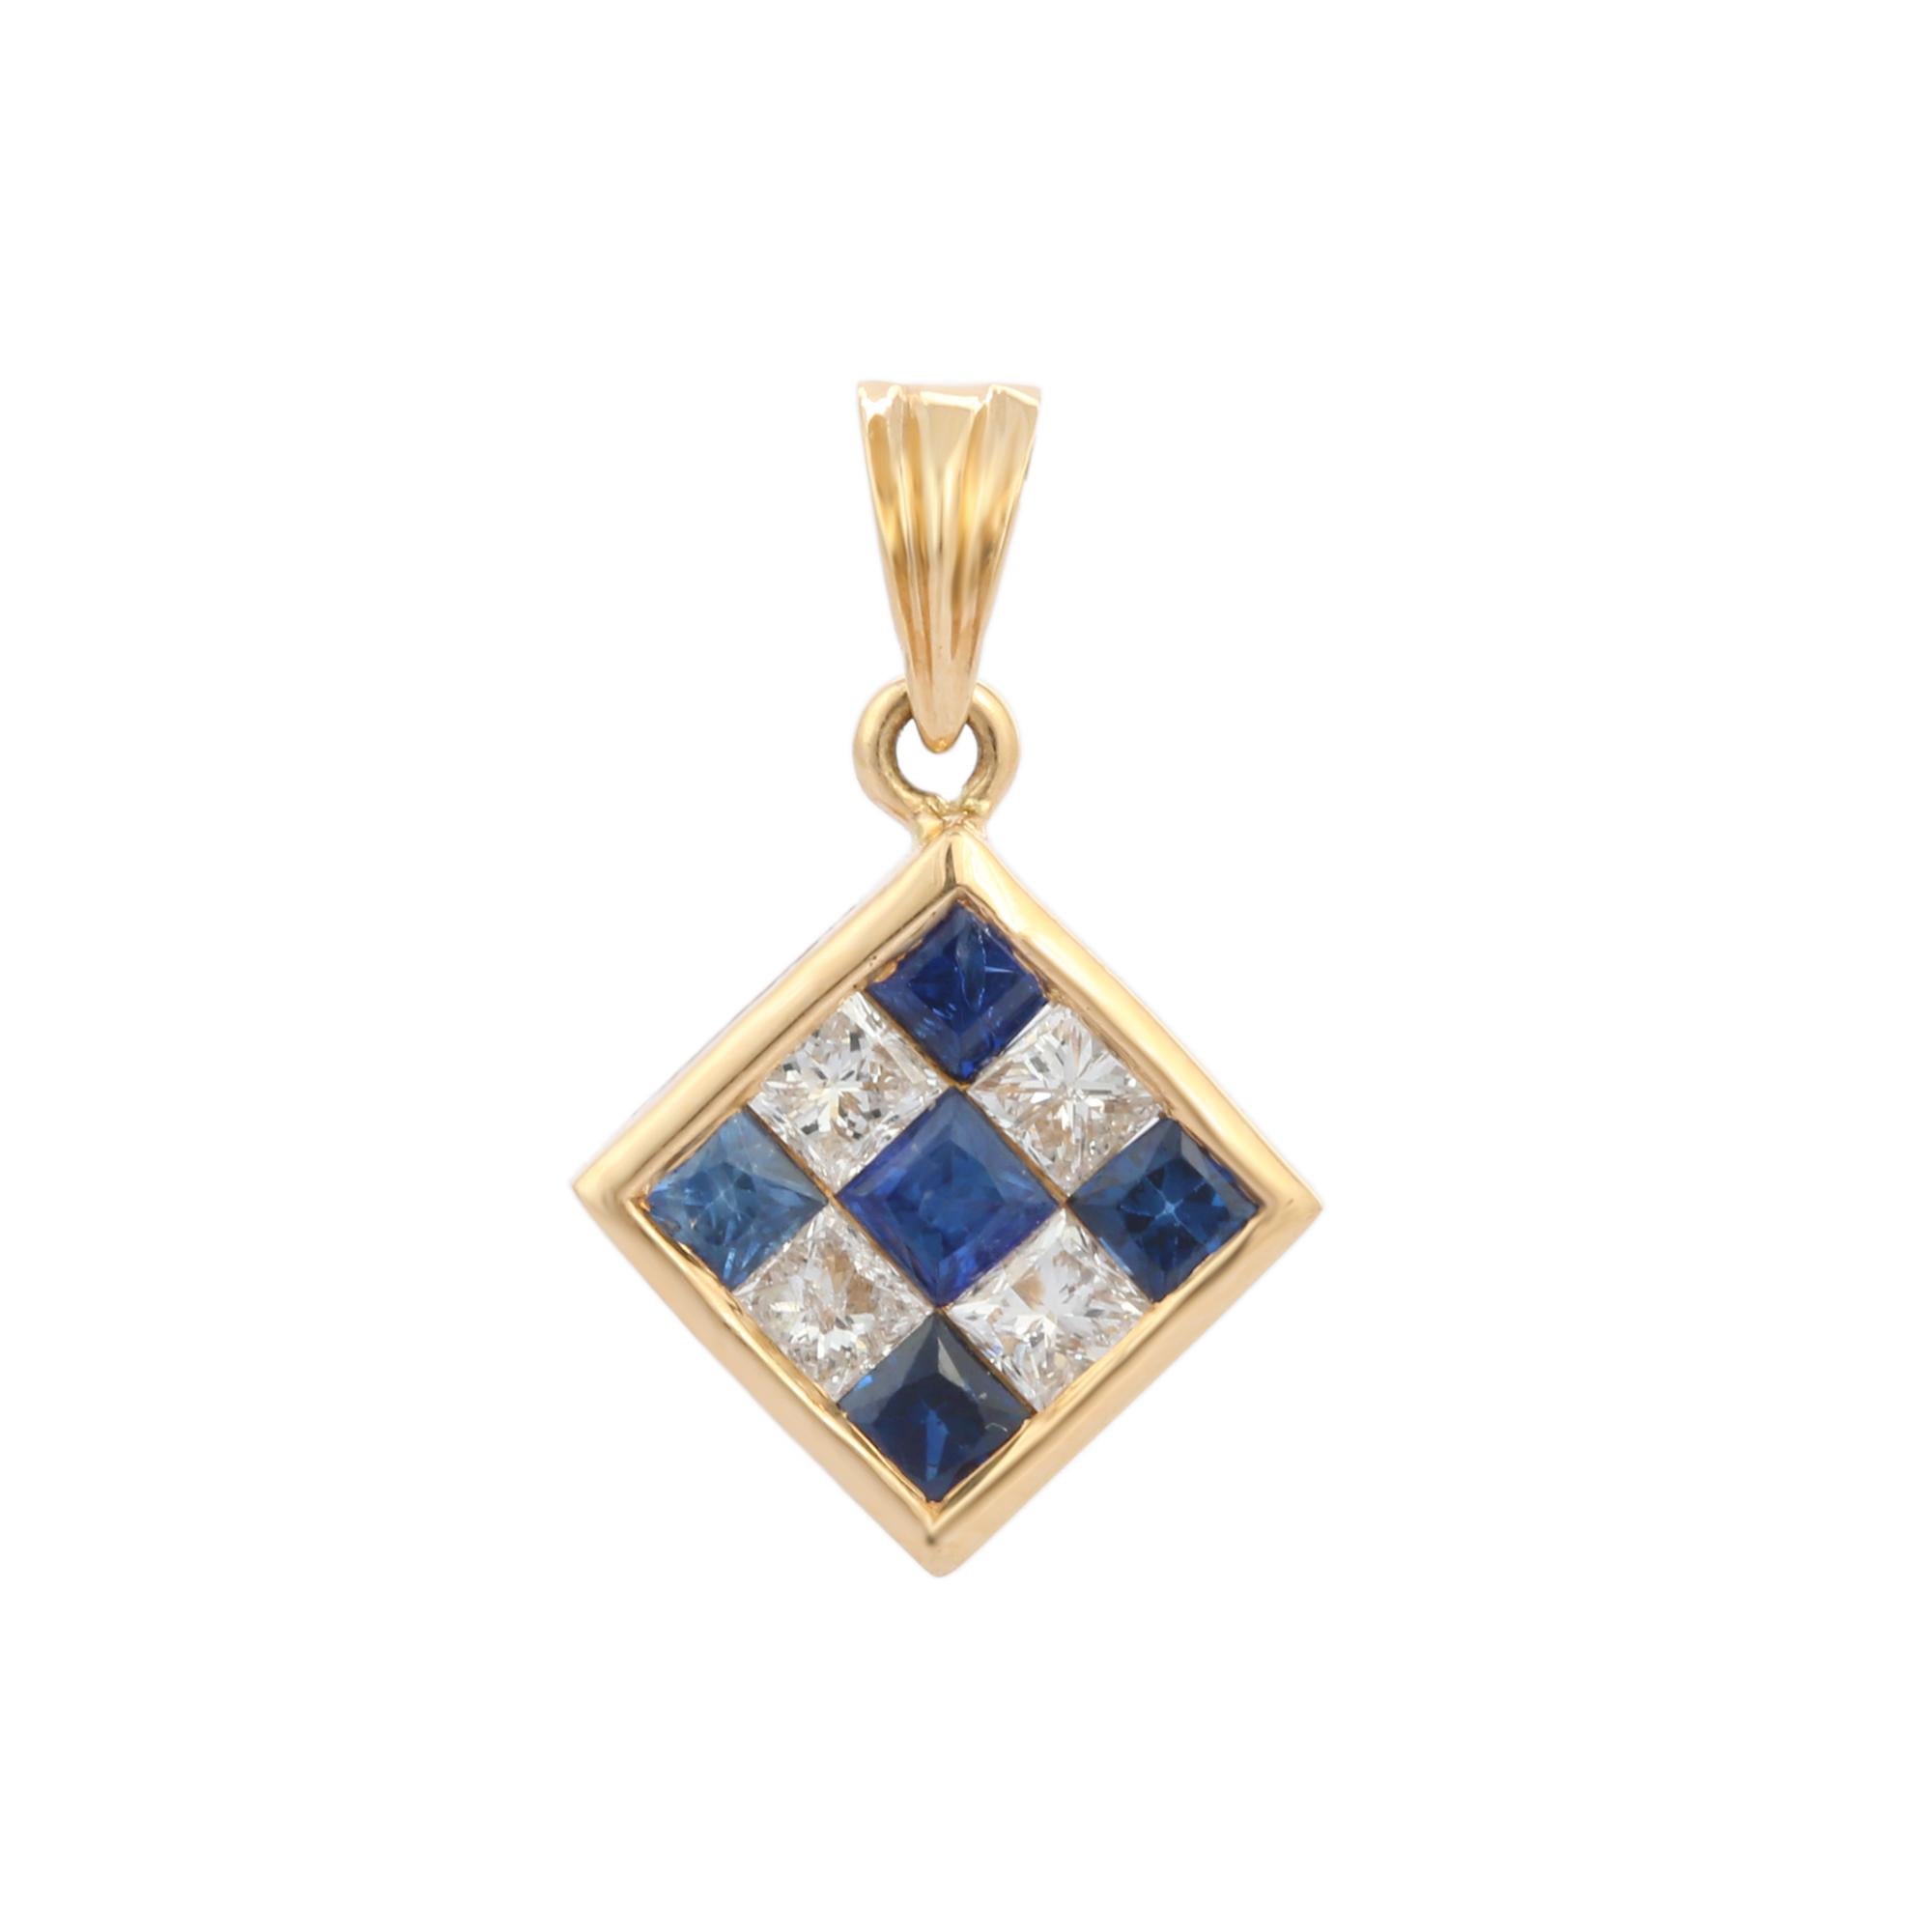 Natural Blue Sapphire Square Shape pendant in 18K Gold. It has square cut sapphires with studded diamond that completes your look with a decent touch. Pendants are used to wear or gifted to represent love and promises. It's an attractive jewelry